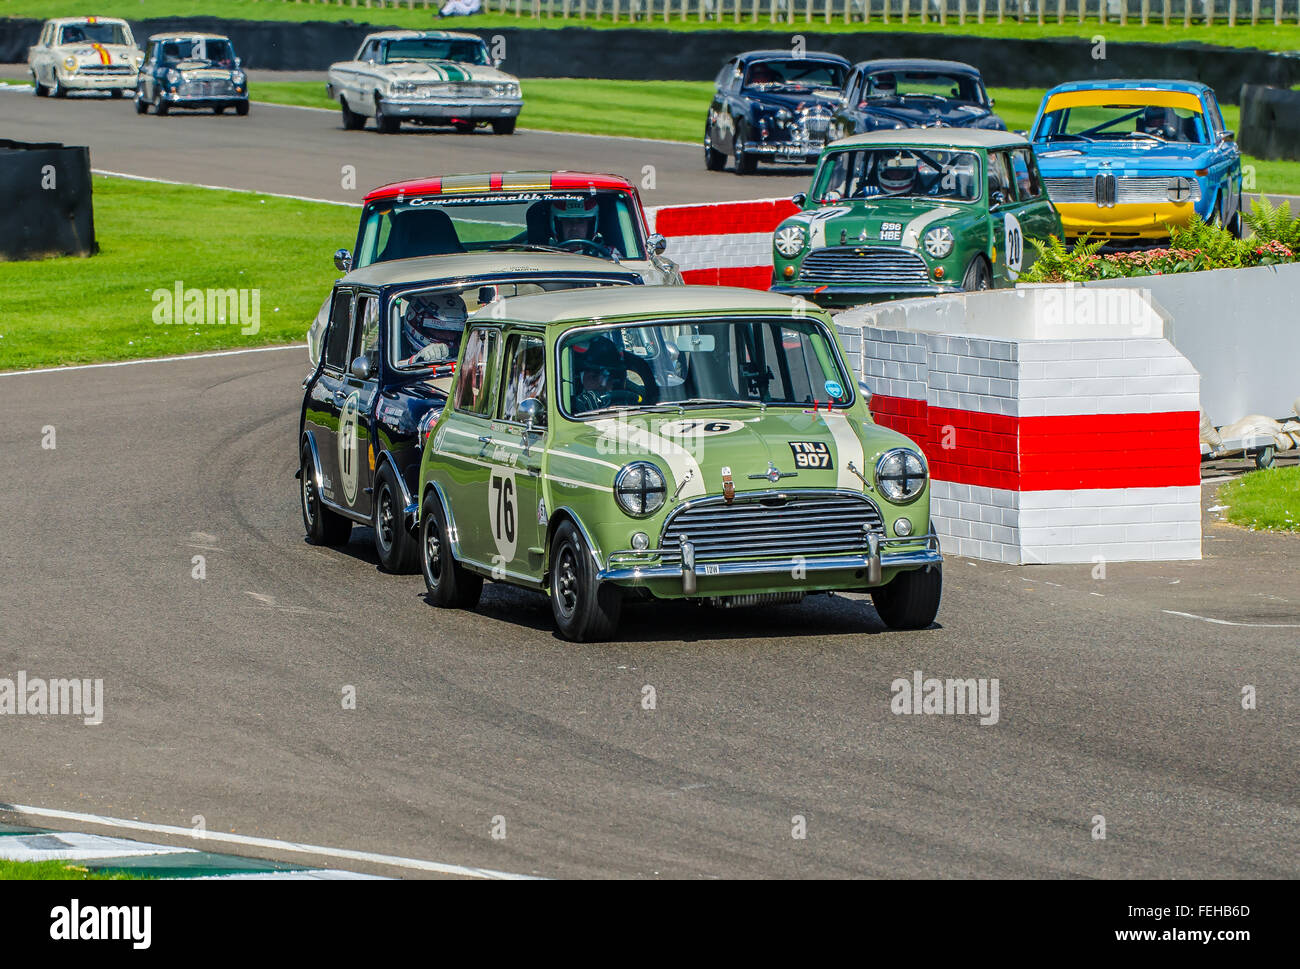 1963 Austin Mini Cooper S is owned by Nick Swift and was raced by him and Karun Chandhok at the 2015 Goodwood Revival Stock Photo